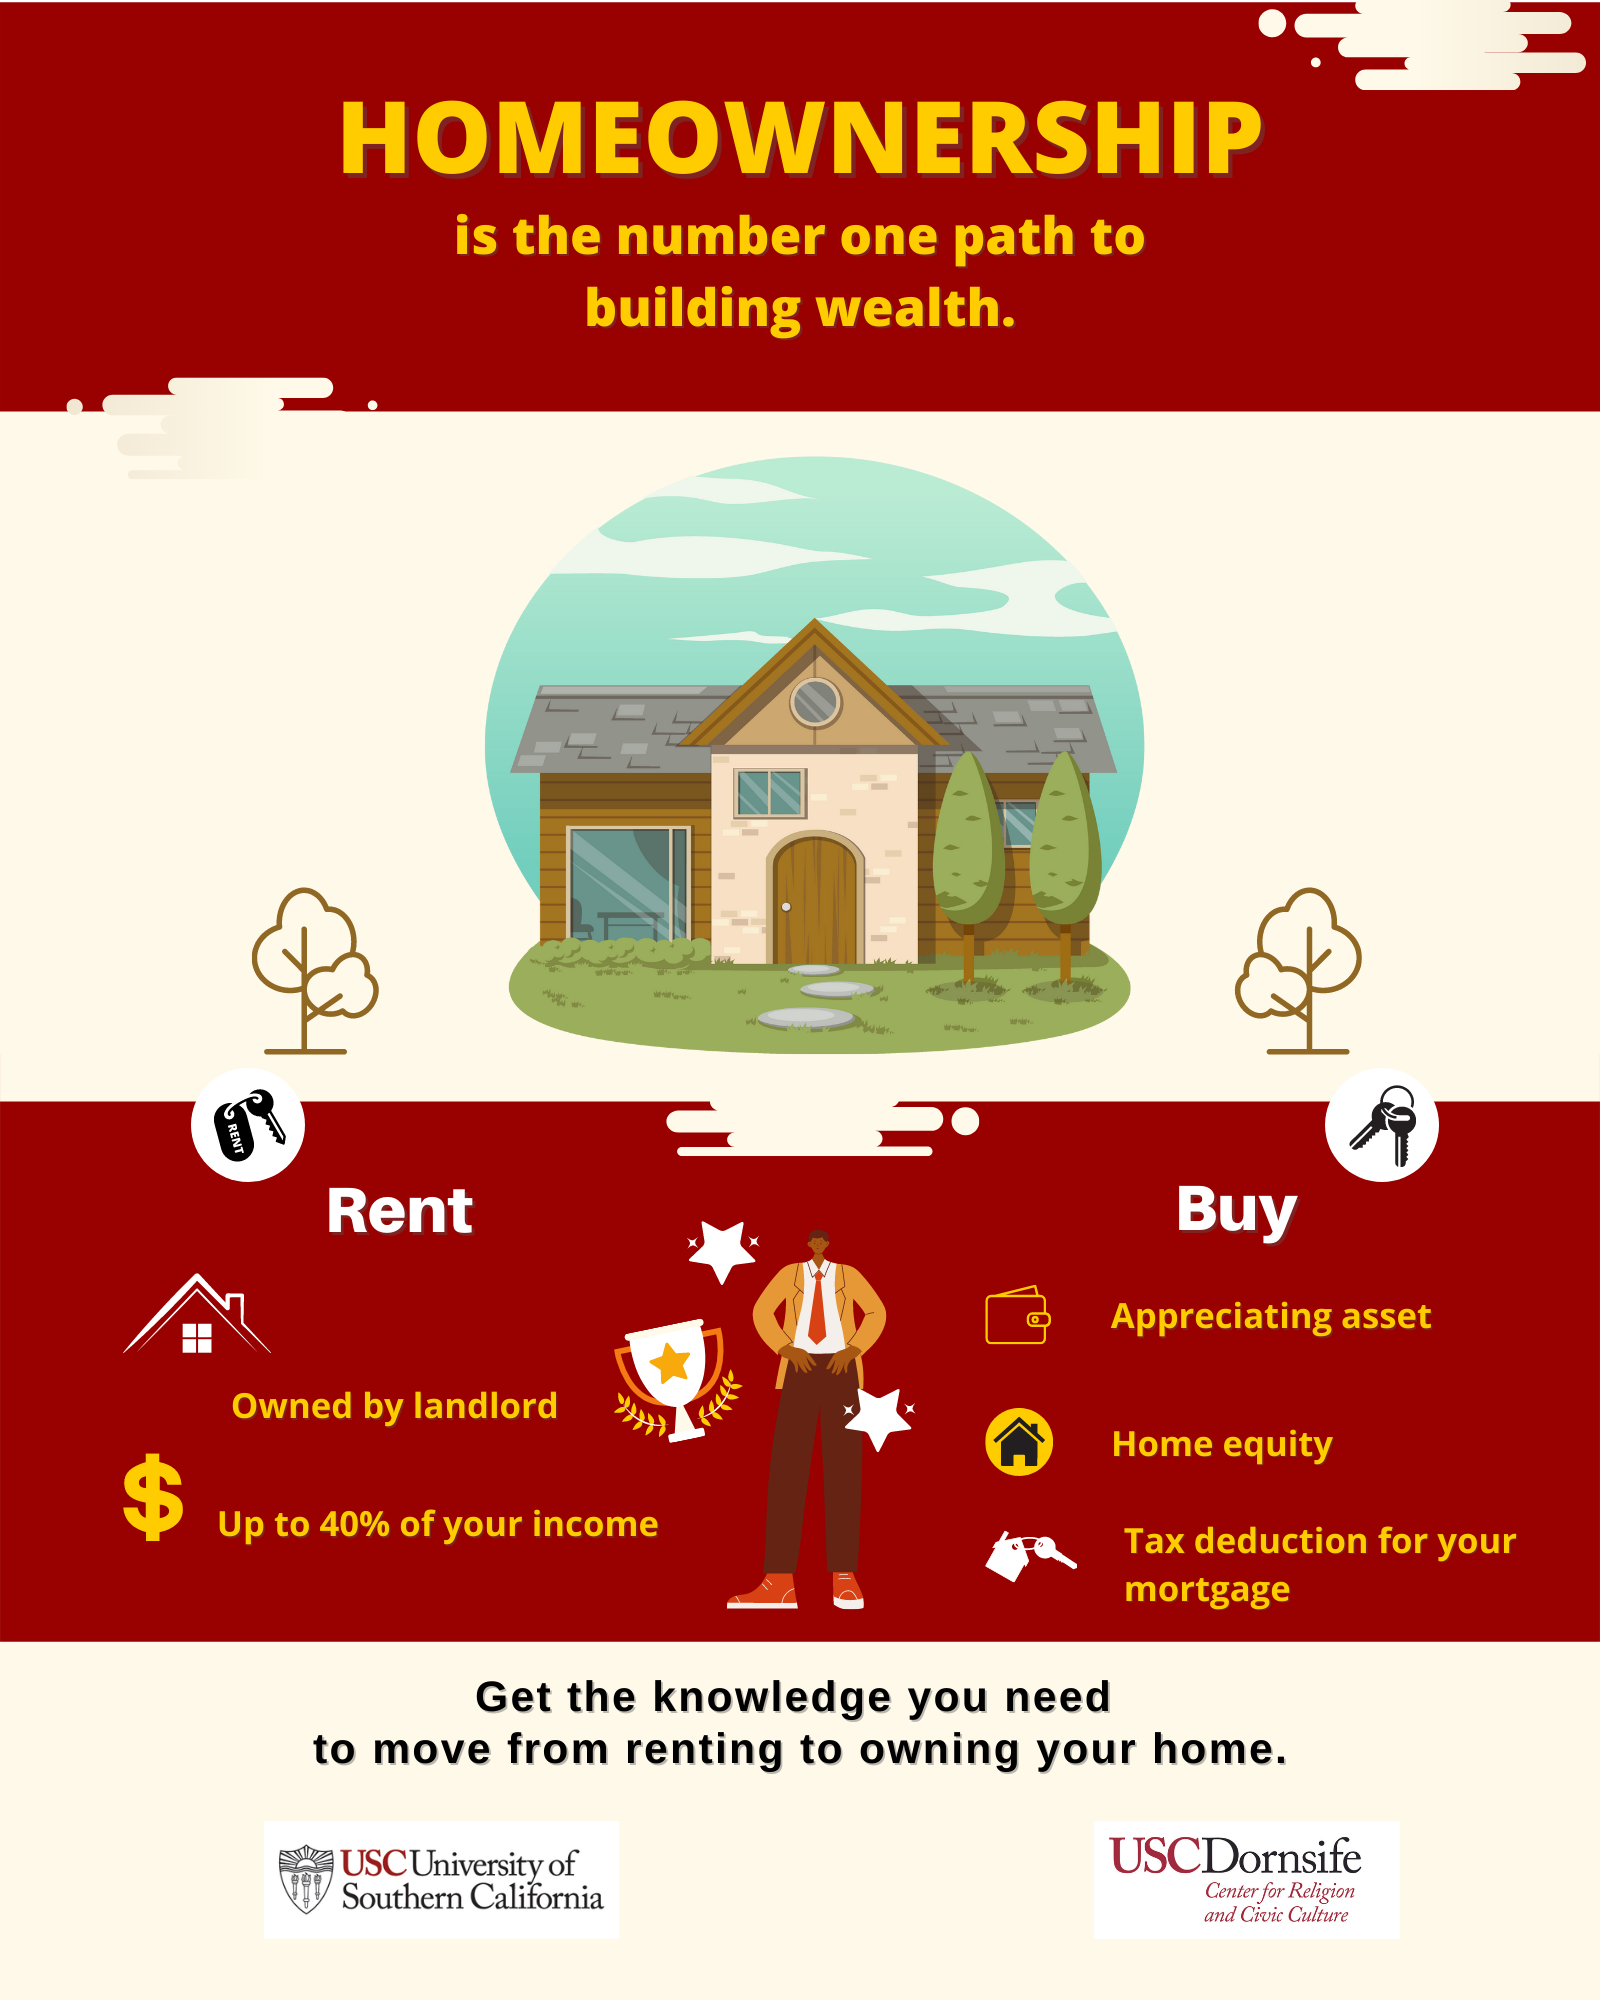 Homeownership is the number one path to building wealth. Show Rent versus Buy